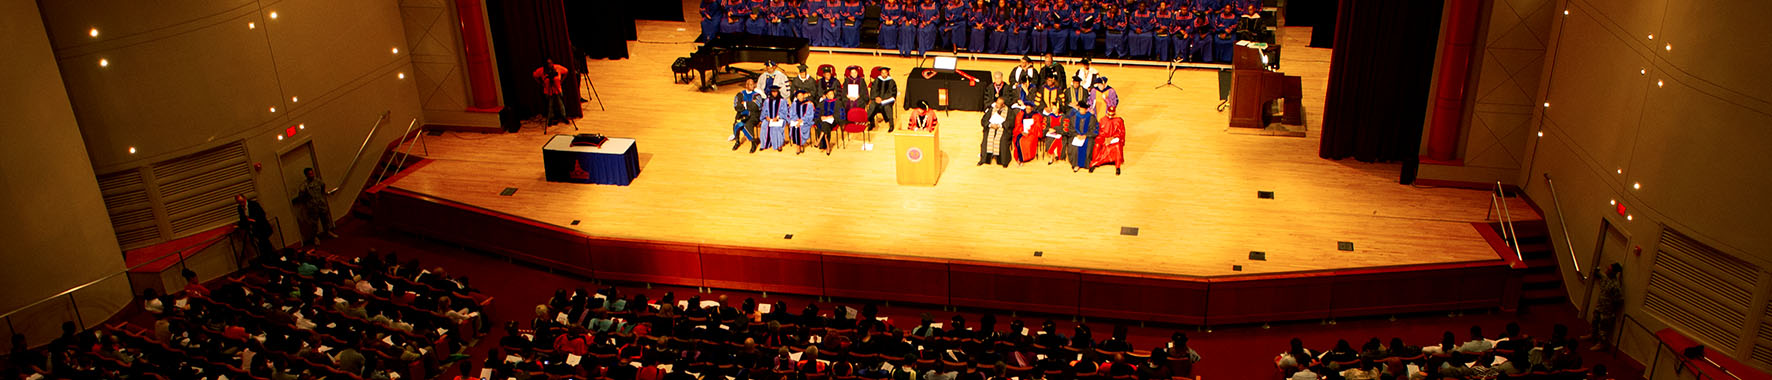 convocation at Gilliam Concert Hall